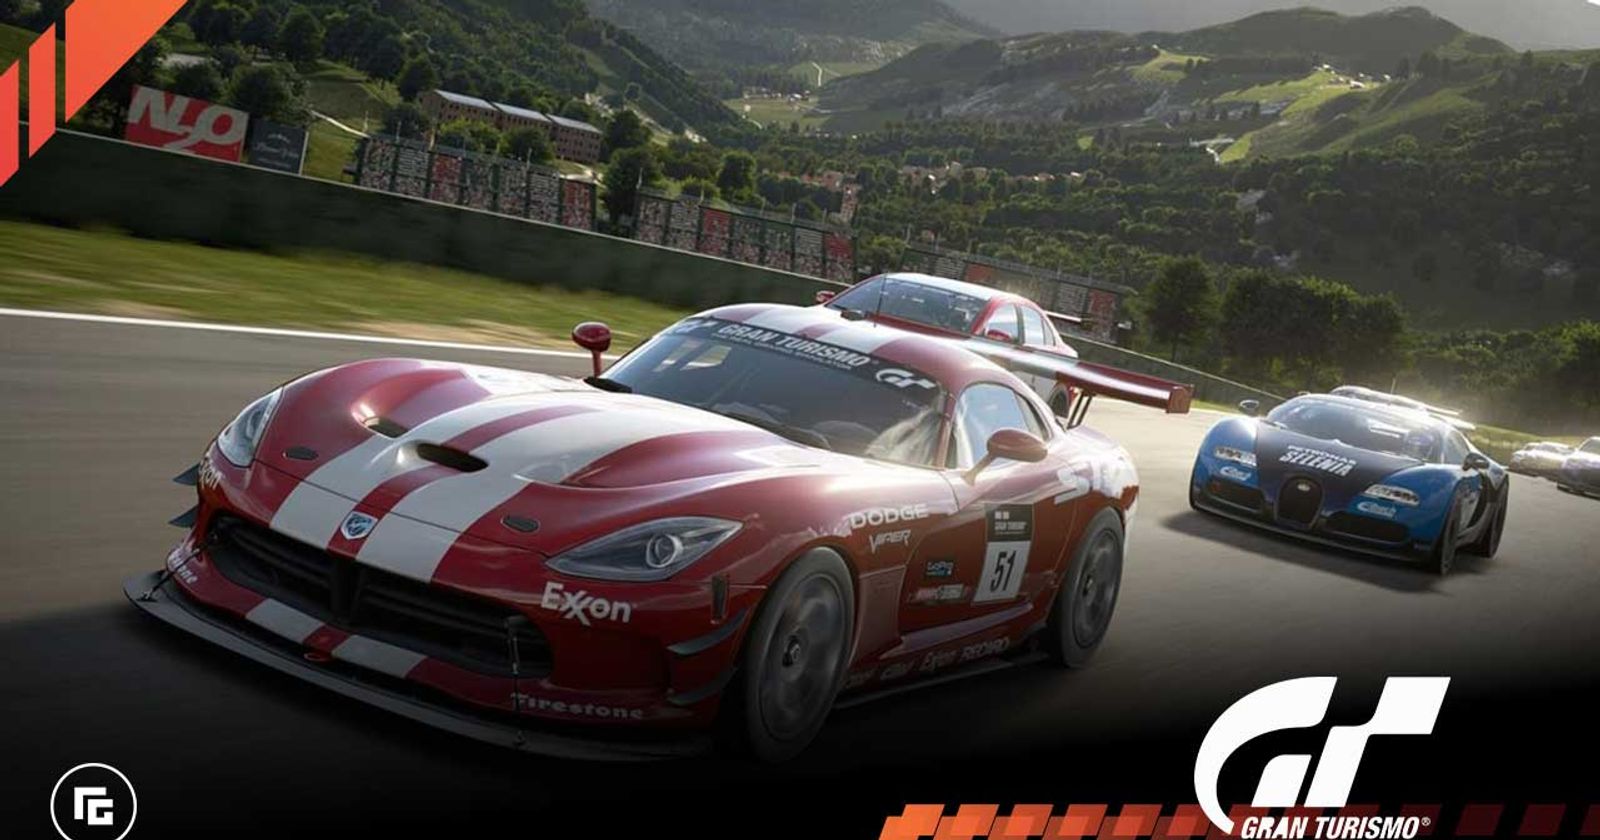 Play PlayStation Gran Turismo Online in your browser 